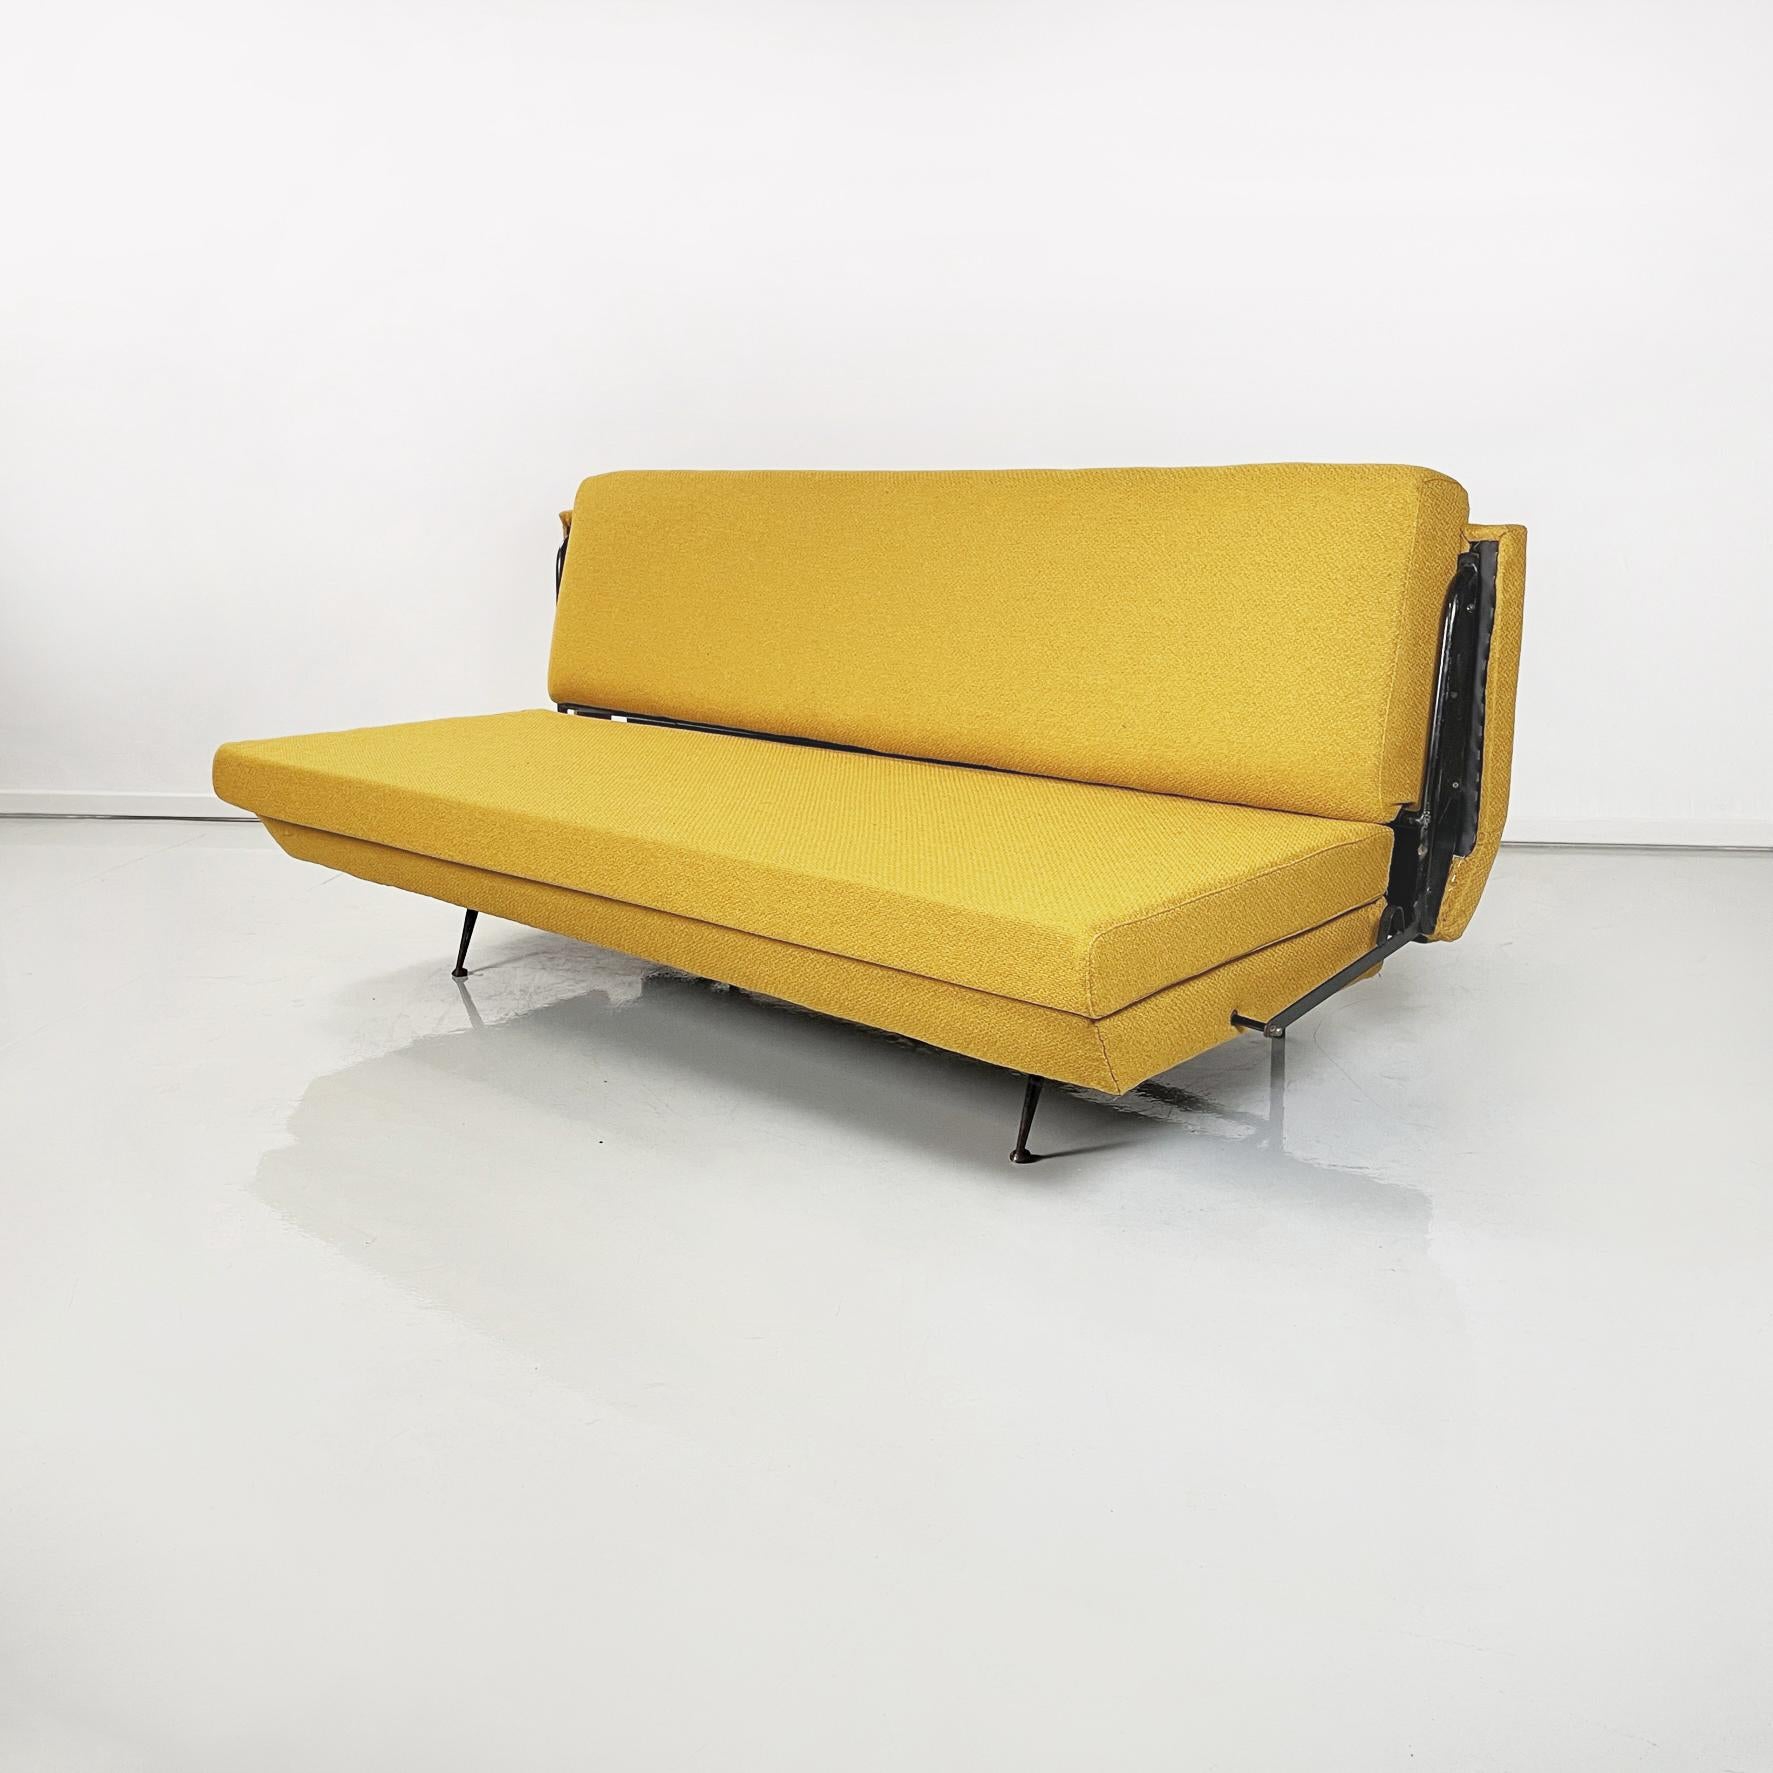 Italian Mid-Century Modern Sofa and bed in yellow fabric and black metal, 1960s
Sofa with padded rectangular seat and backrest, upholstered in mustard yellow fabric. The armrests have a black painted metal tubular structure, which allows the